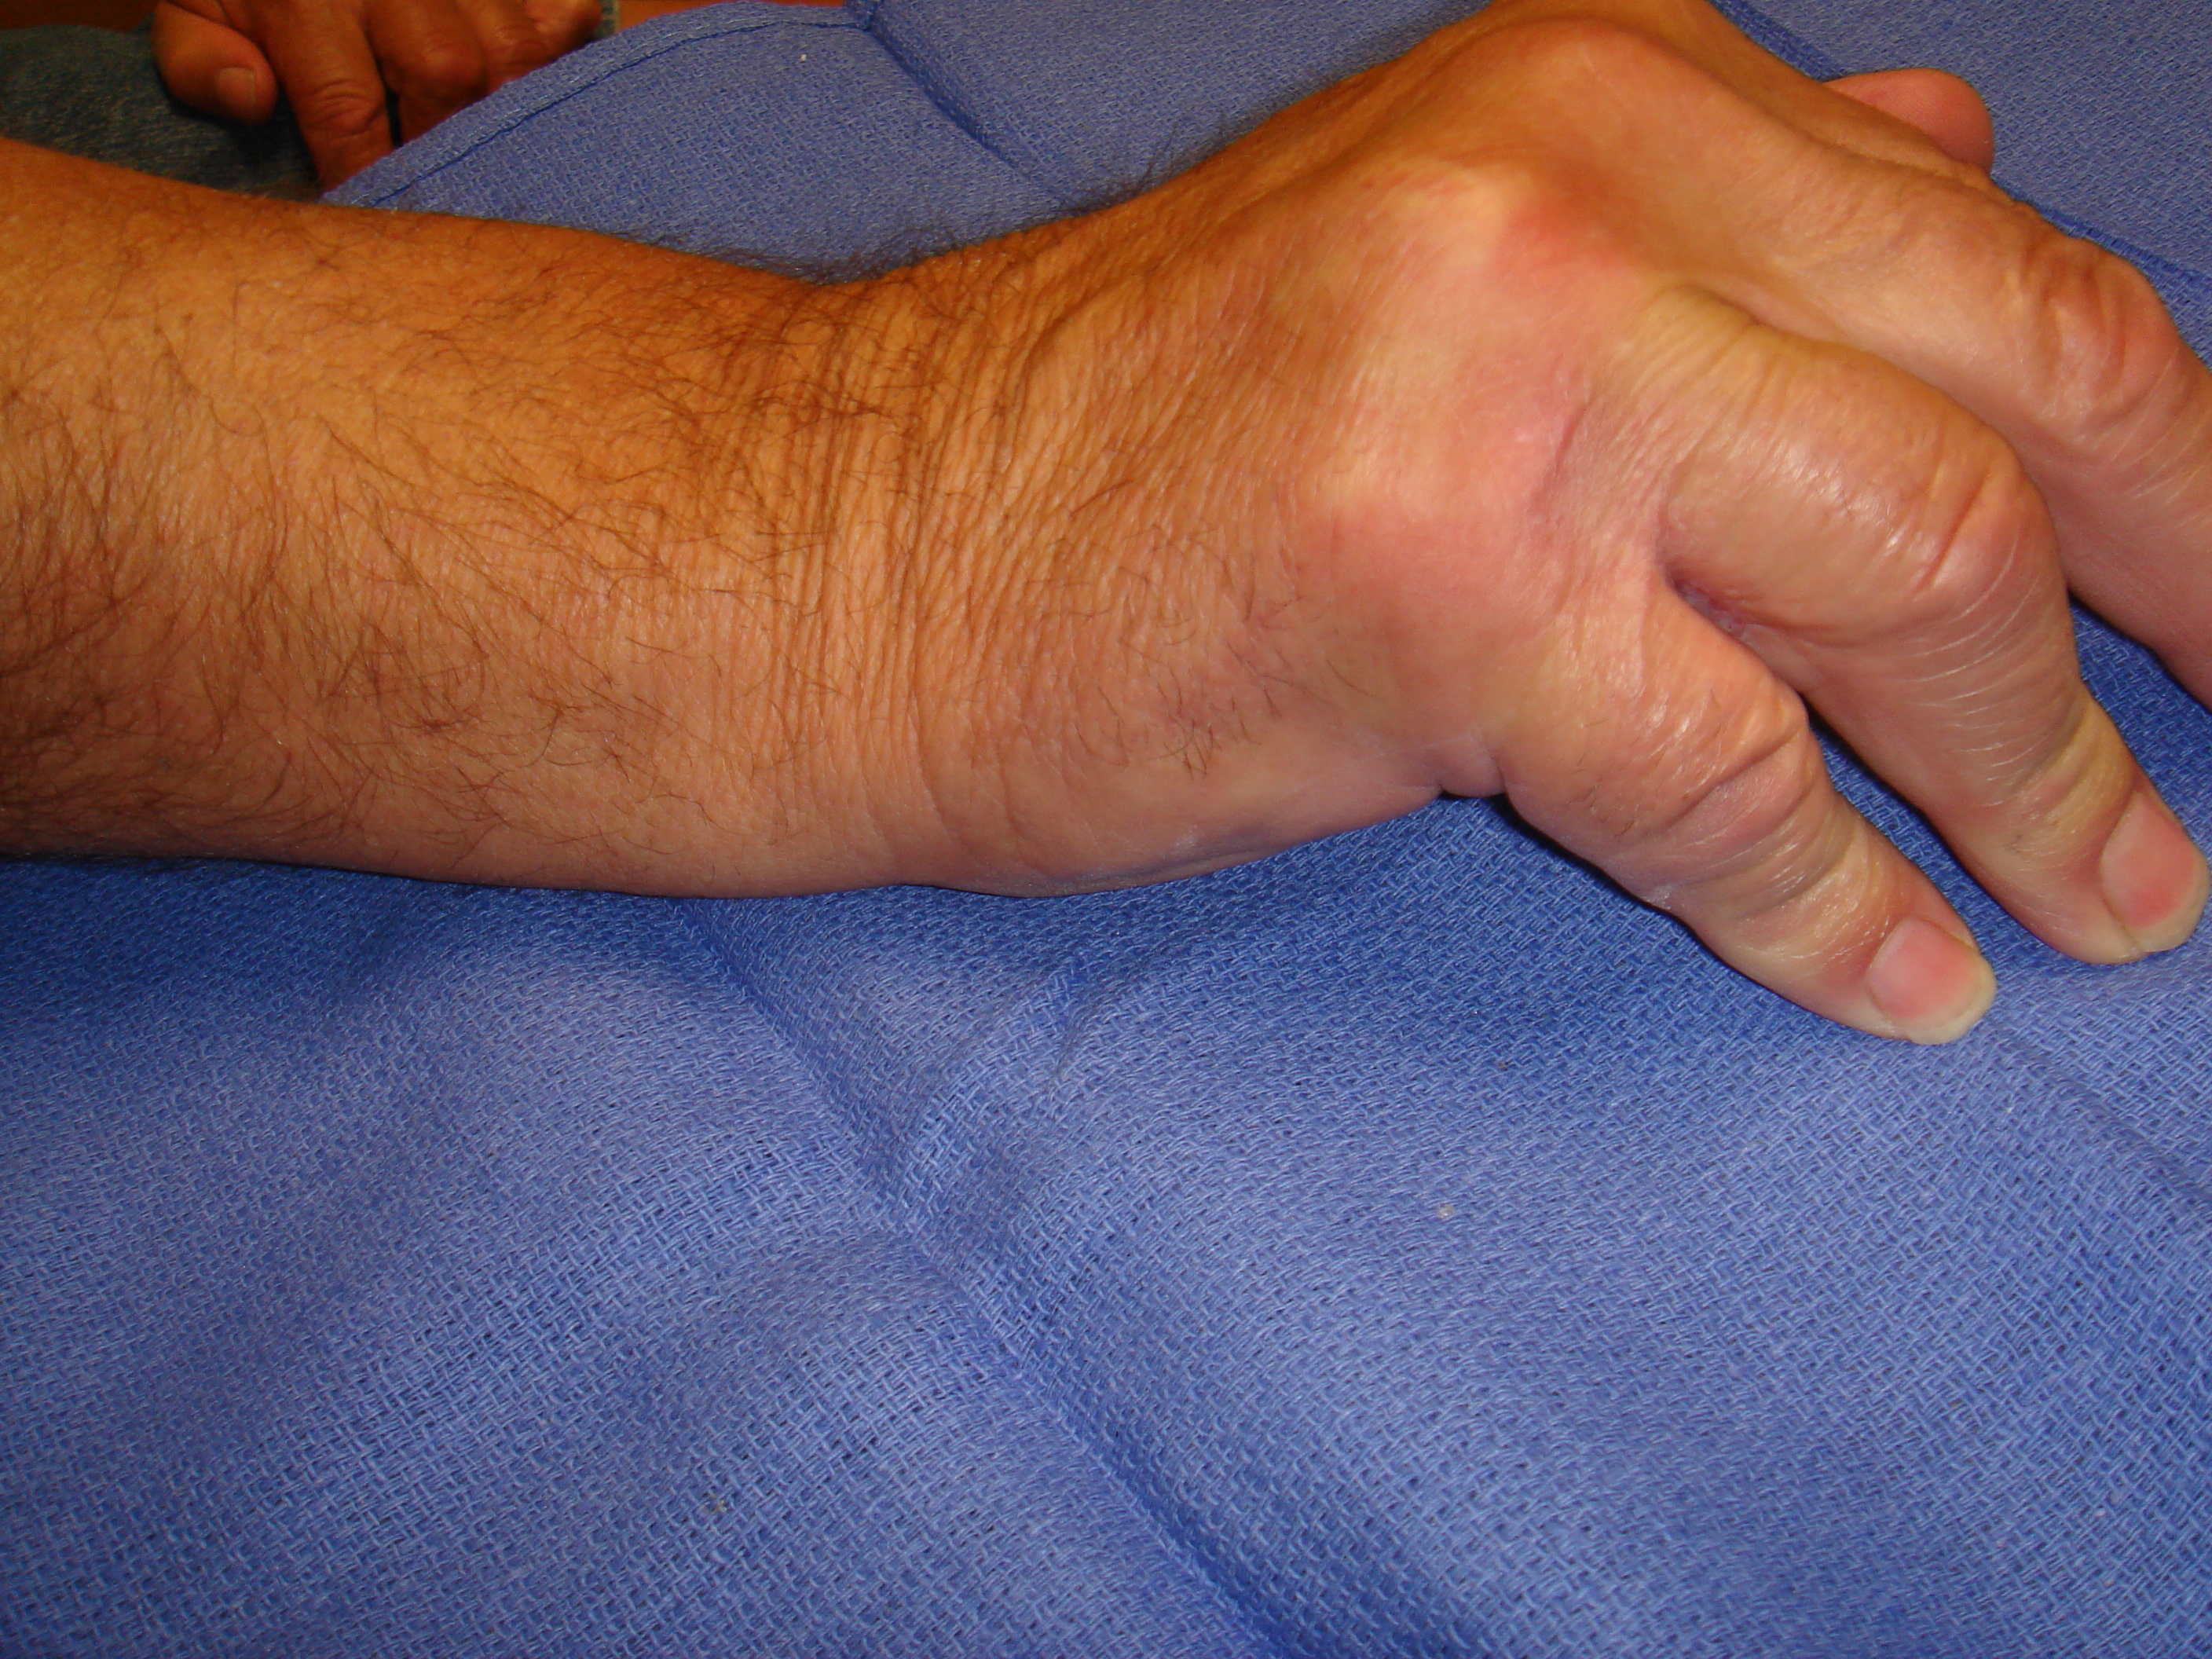 Figure 5b. The right hand of a 70-year-old man with significant, dysfunctional MP joint contractures of the ring and little fingers. He also had contractures of the contralateral left hand, but treatment was started for his dominant right side.